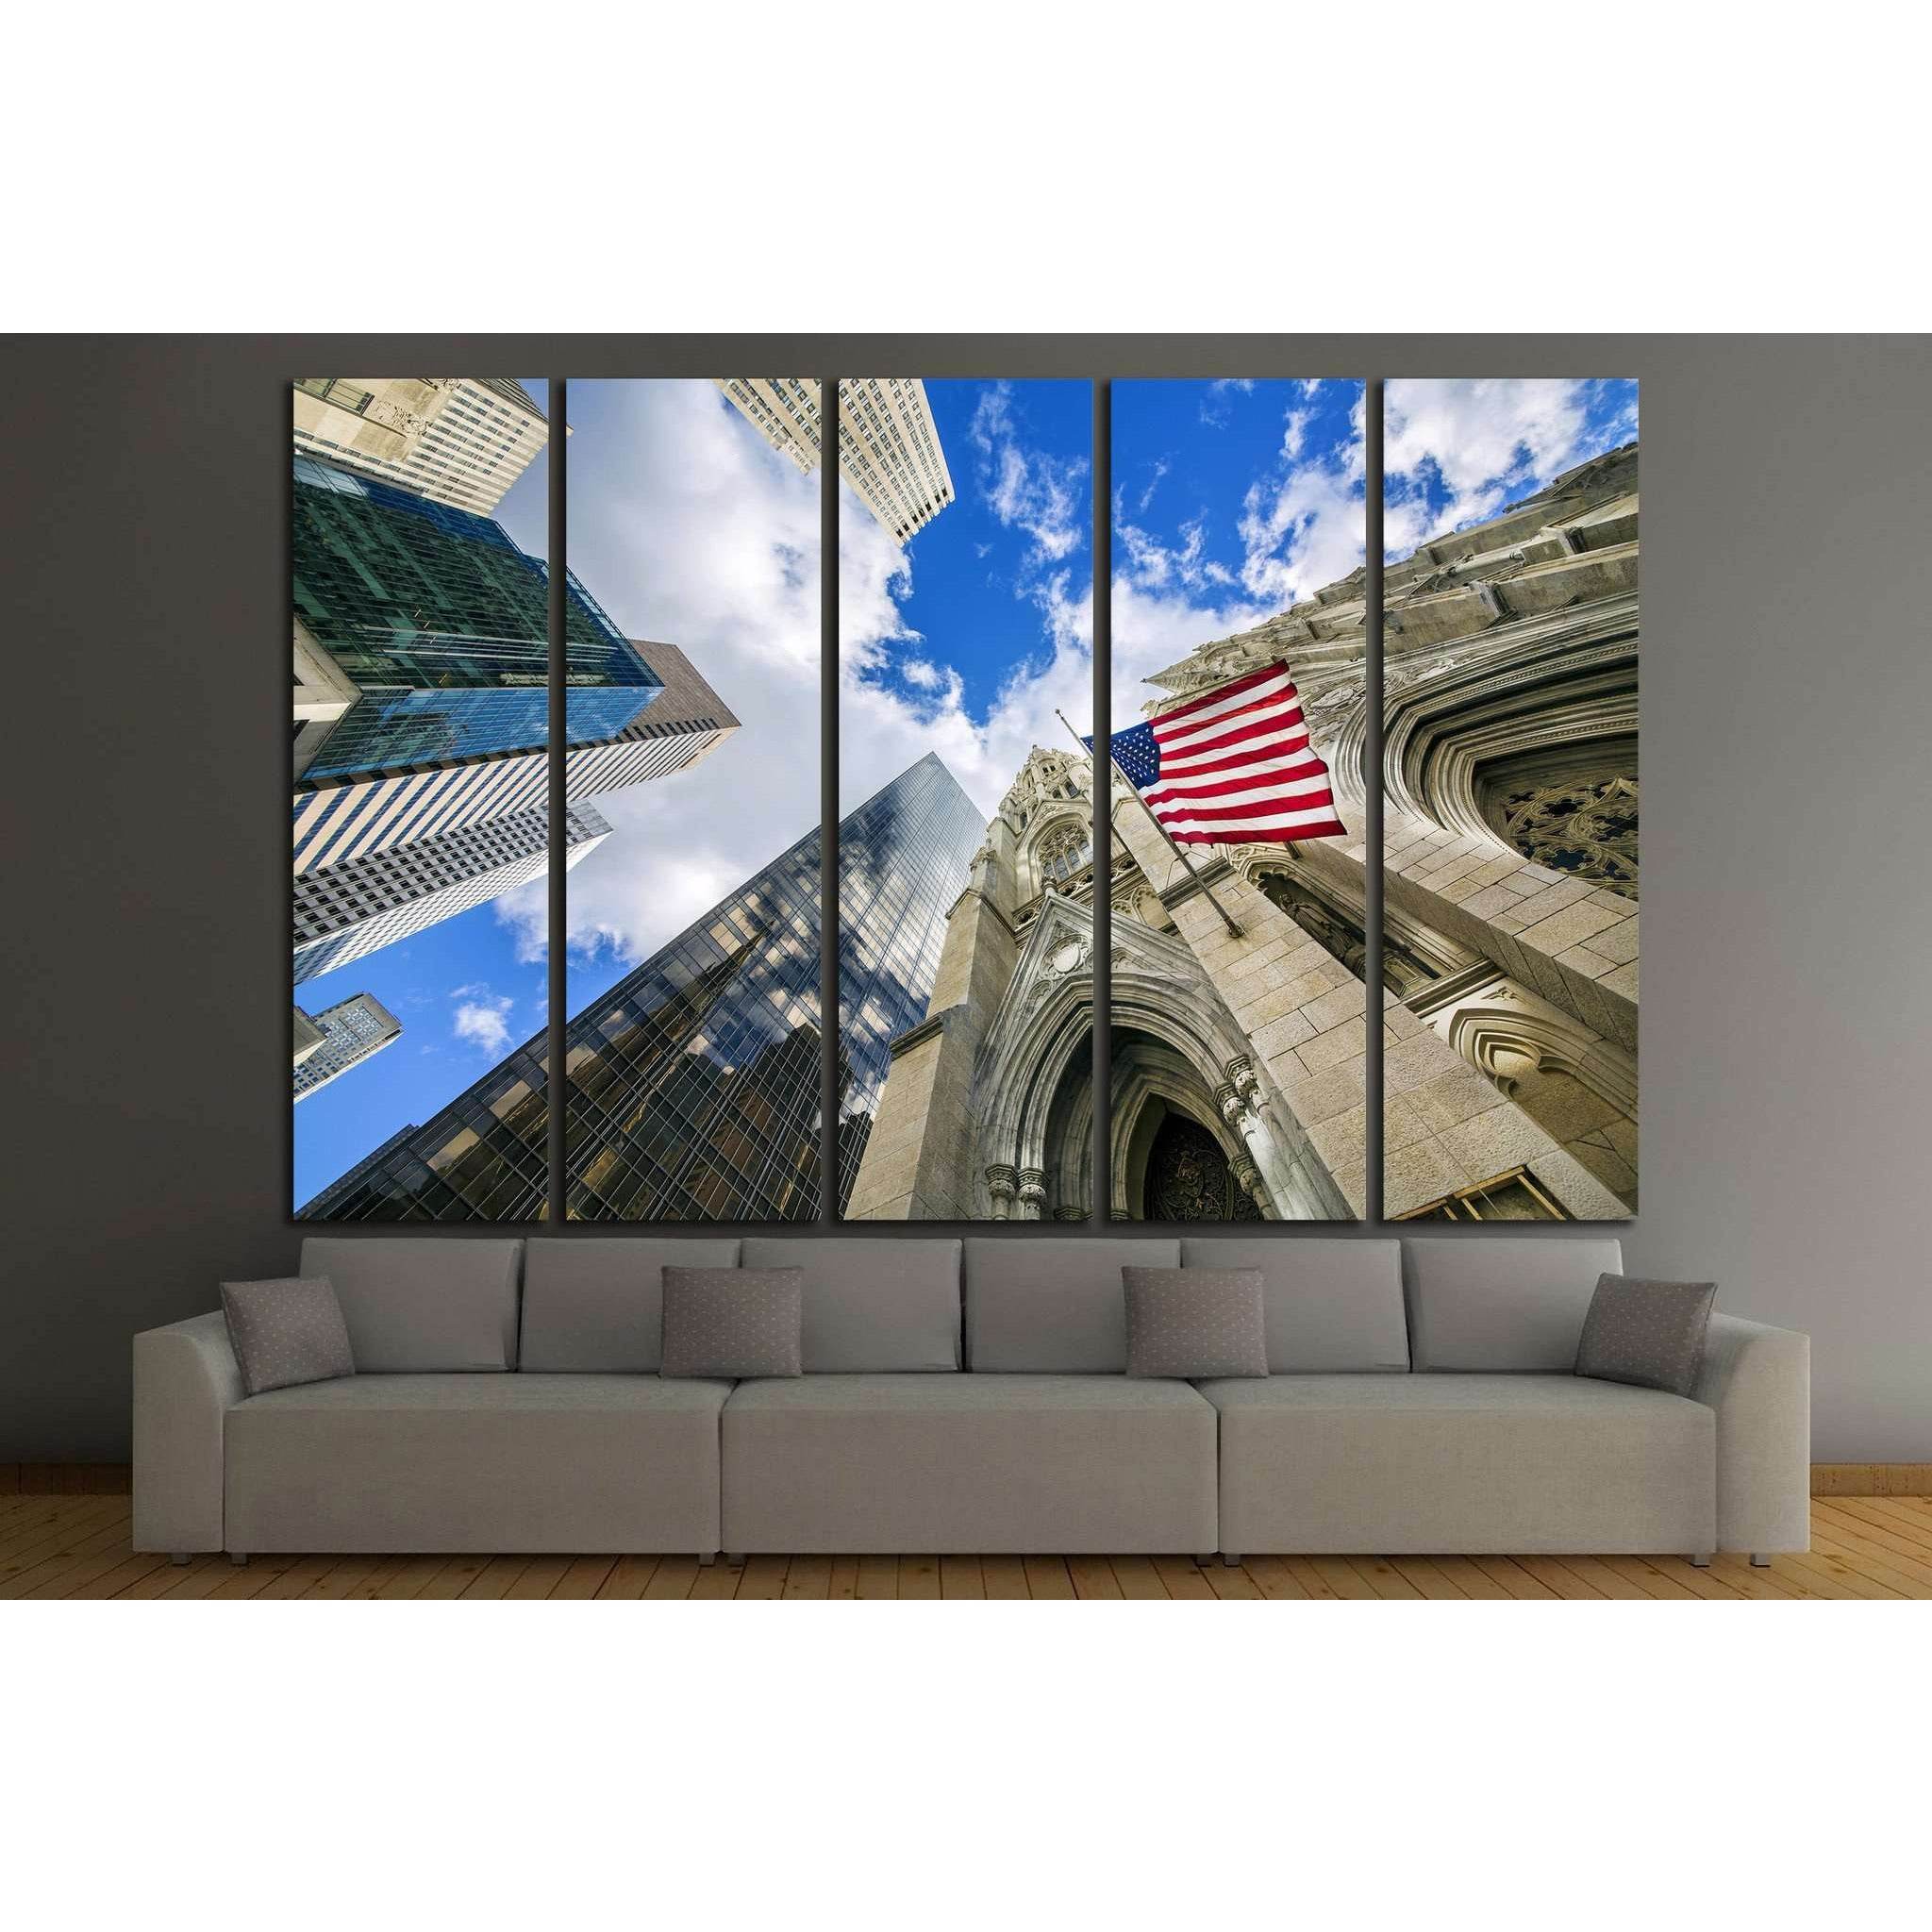 Flag USA on St Patrick's Cathedral, Midtown Skyscrapers, Manhattan, New York №1296 Ready to Hang Canvas Print